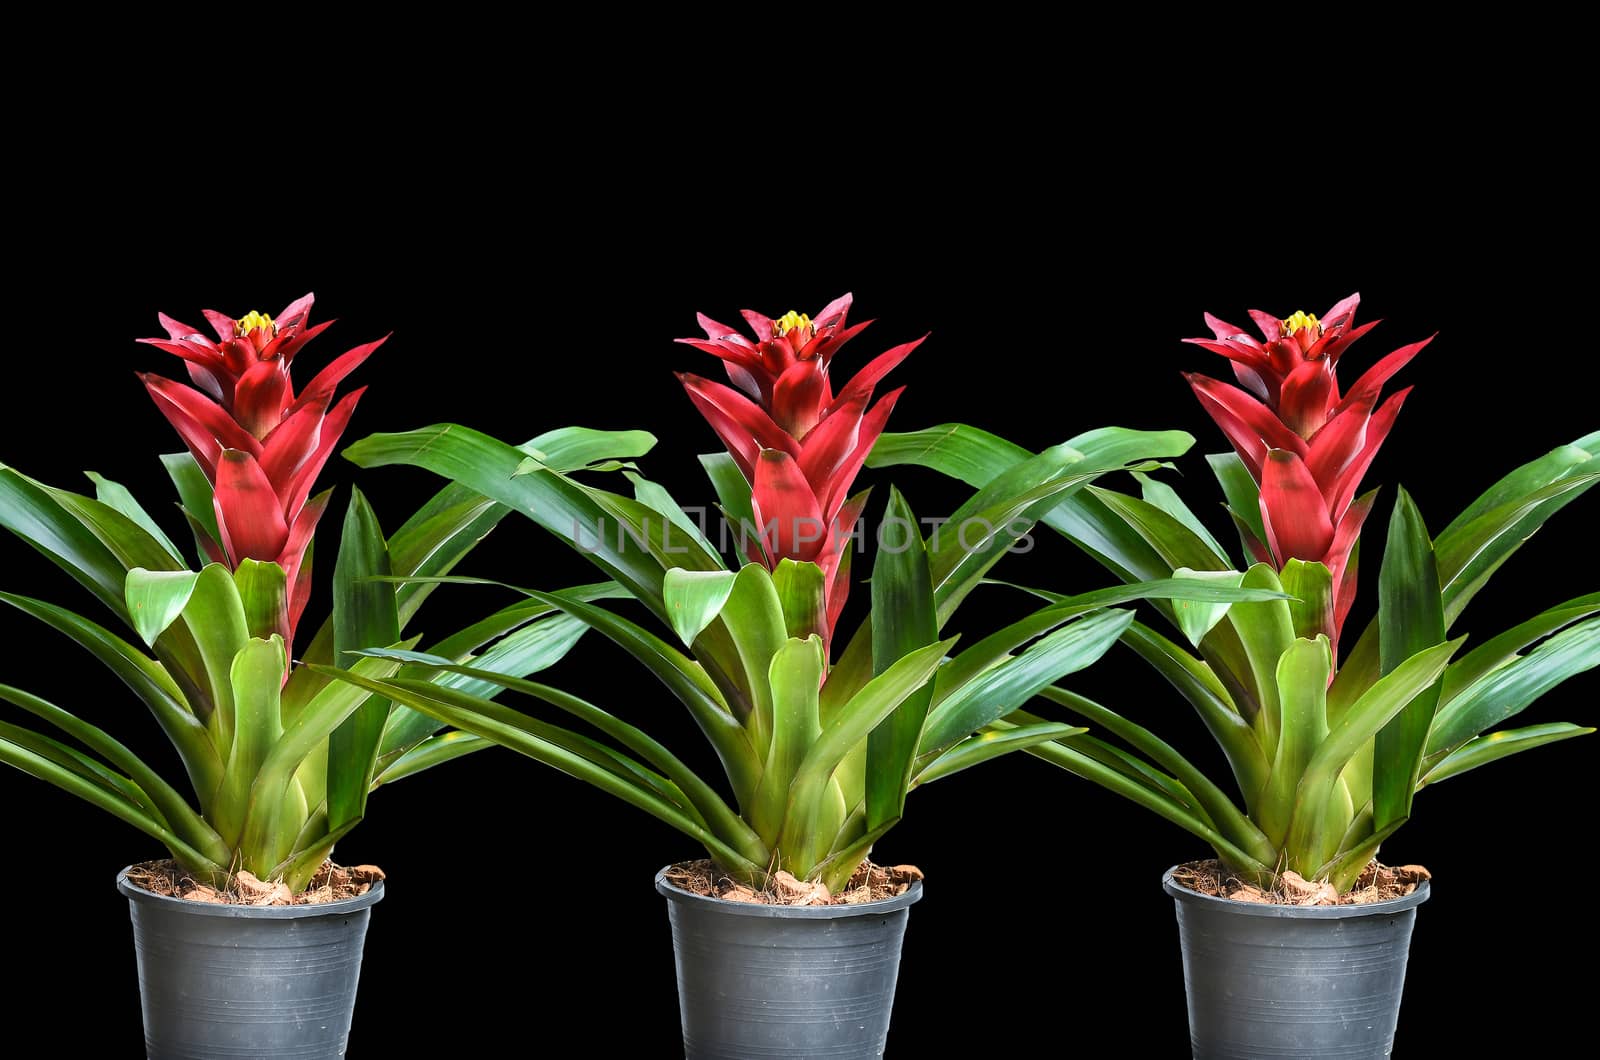 Many Blossoming plant of guzmania in plastic flowerpot on black background